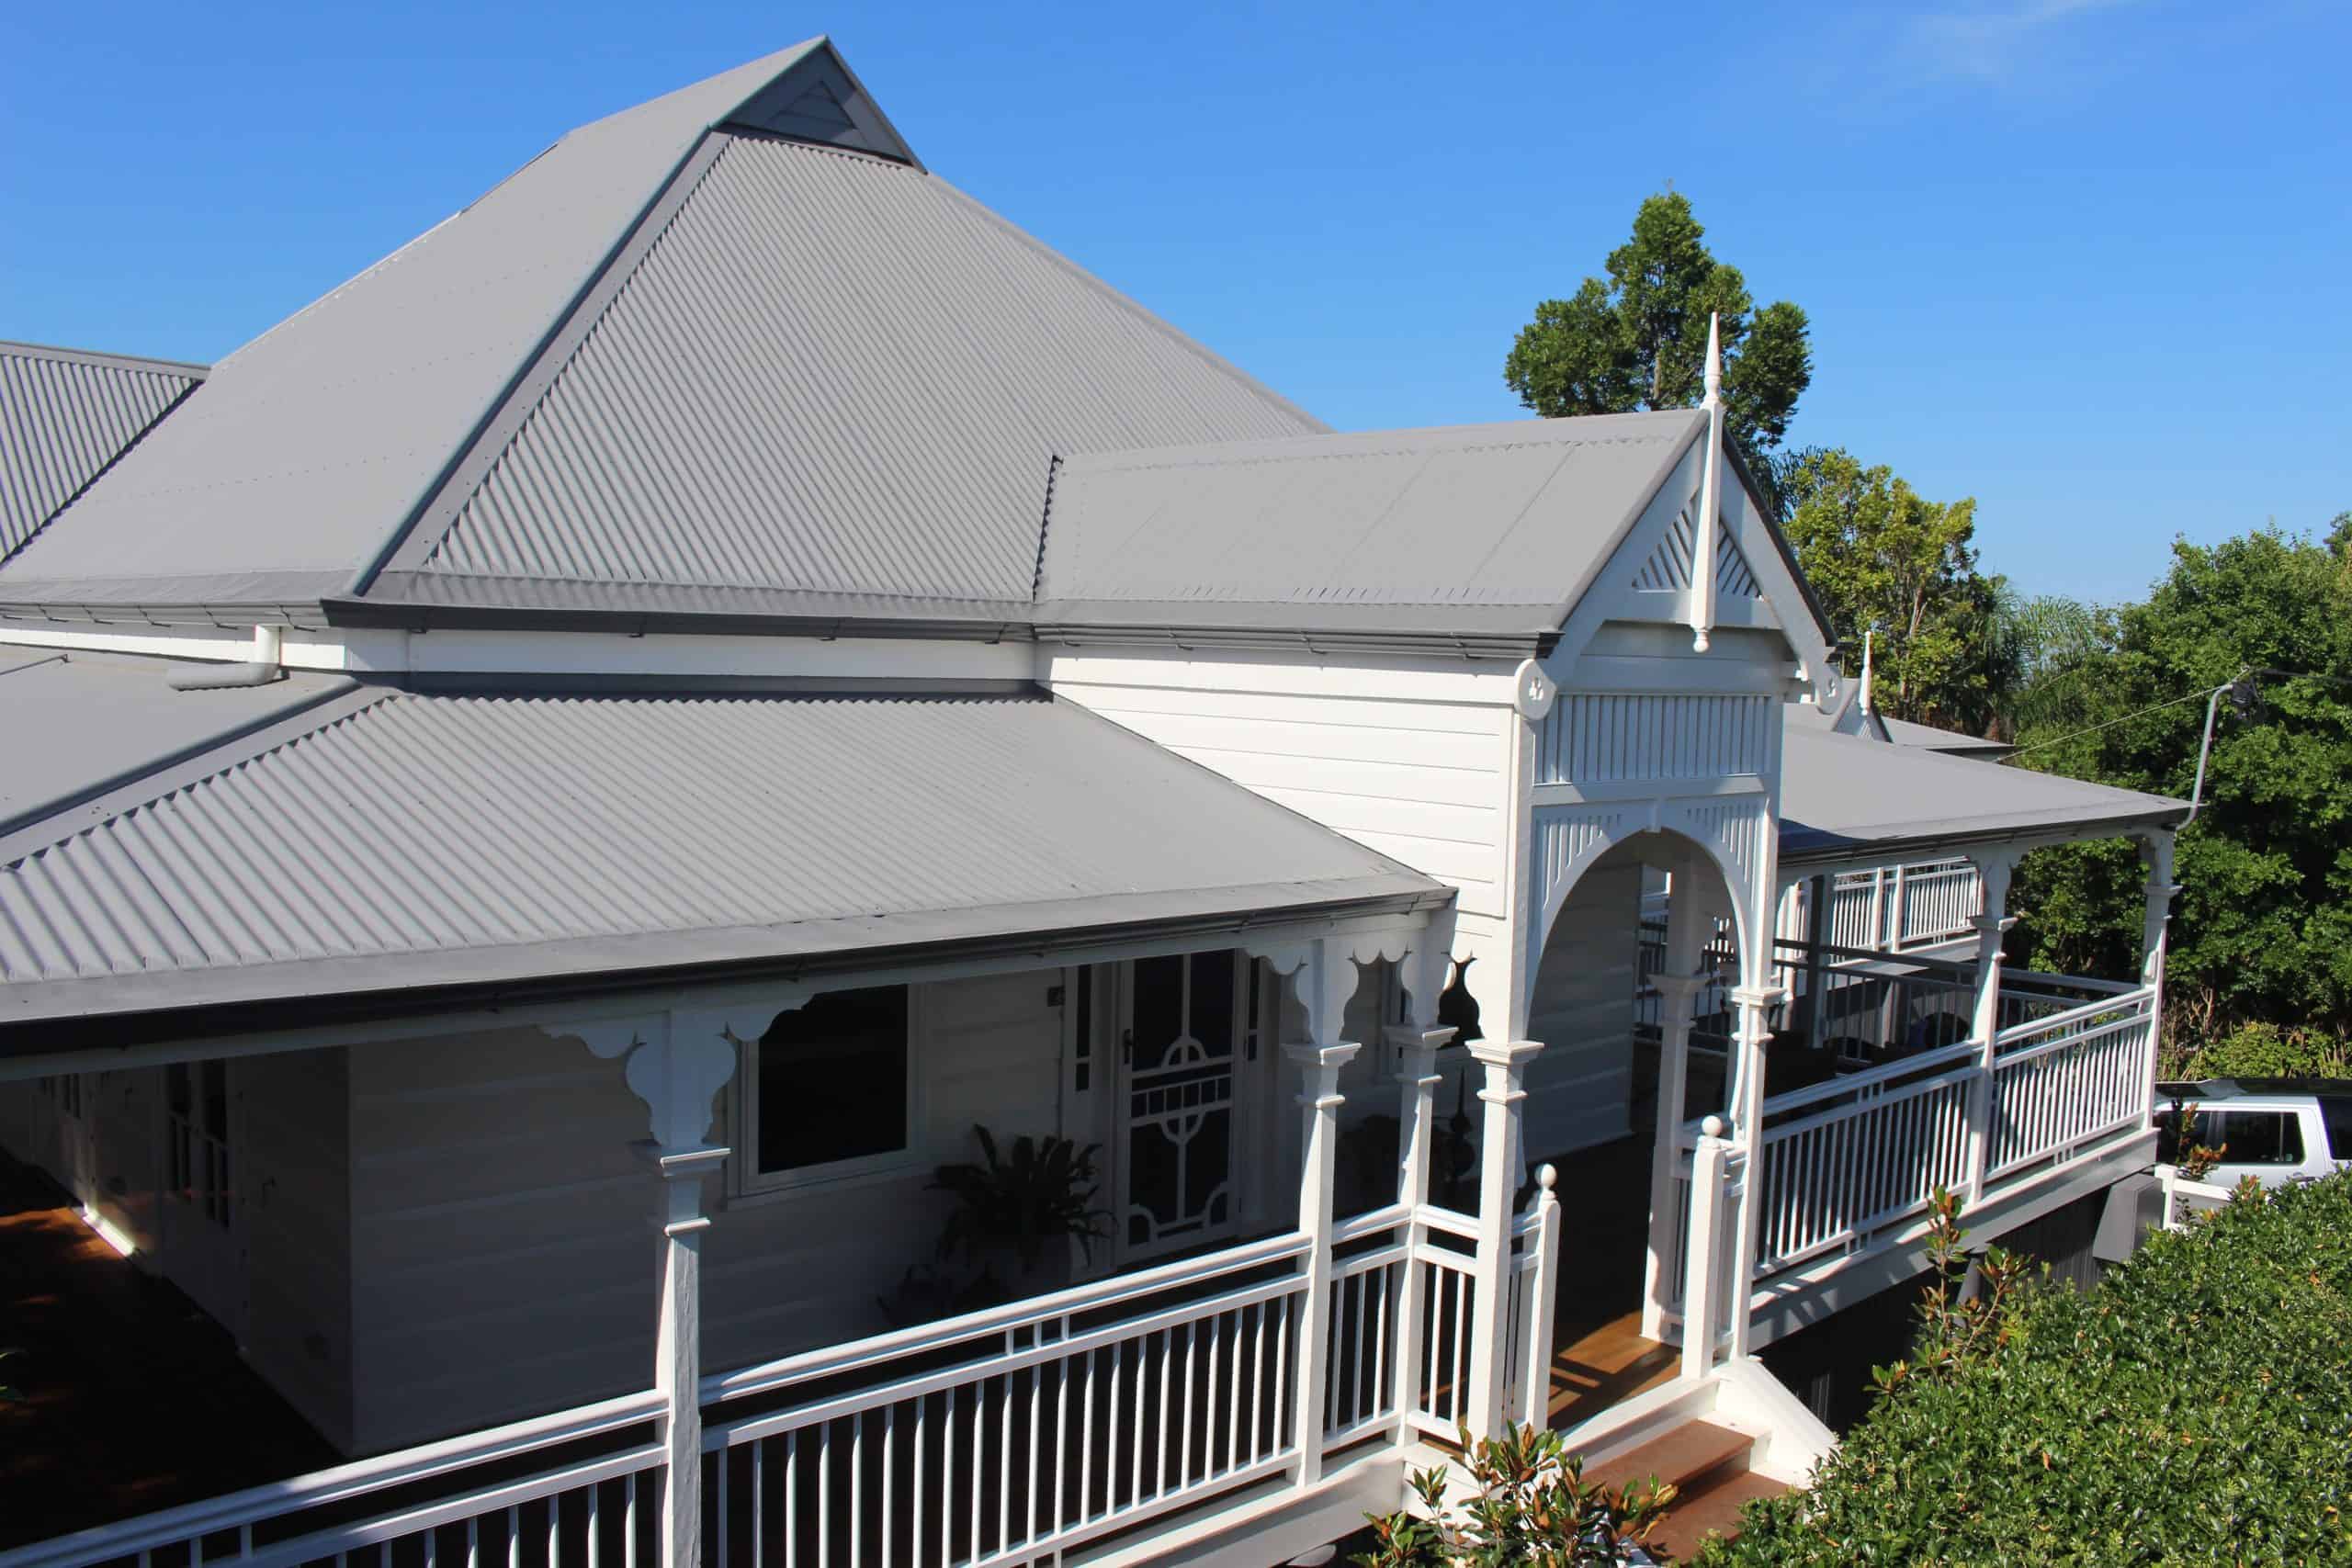 White weatherboard house with grey metal roof and gutter guards.